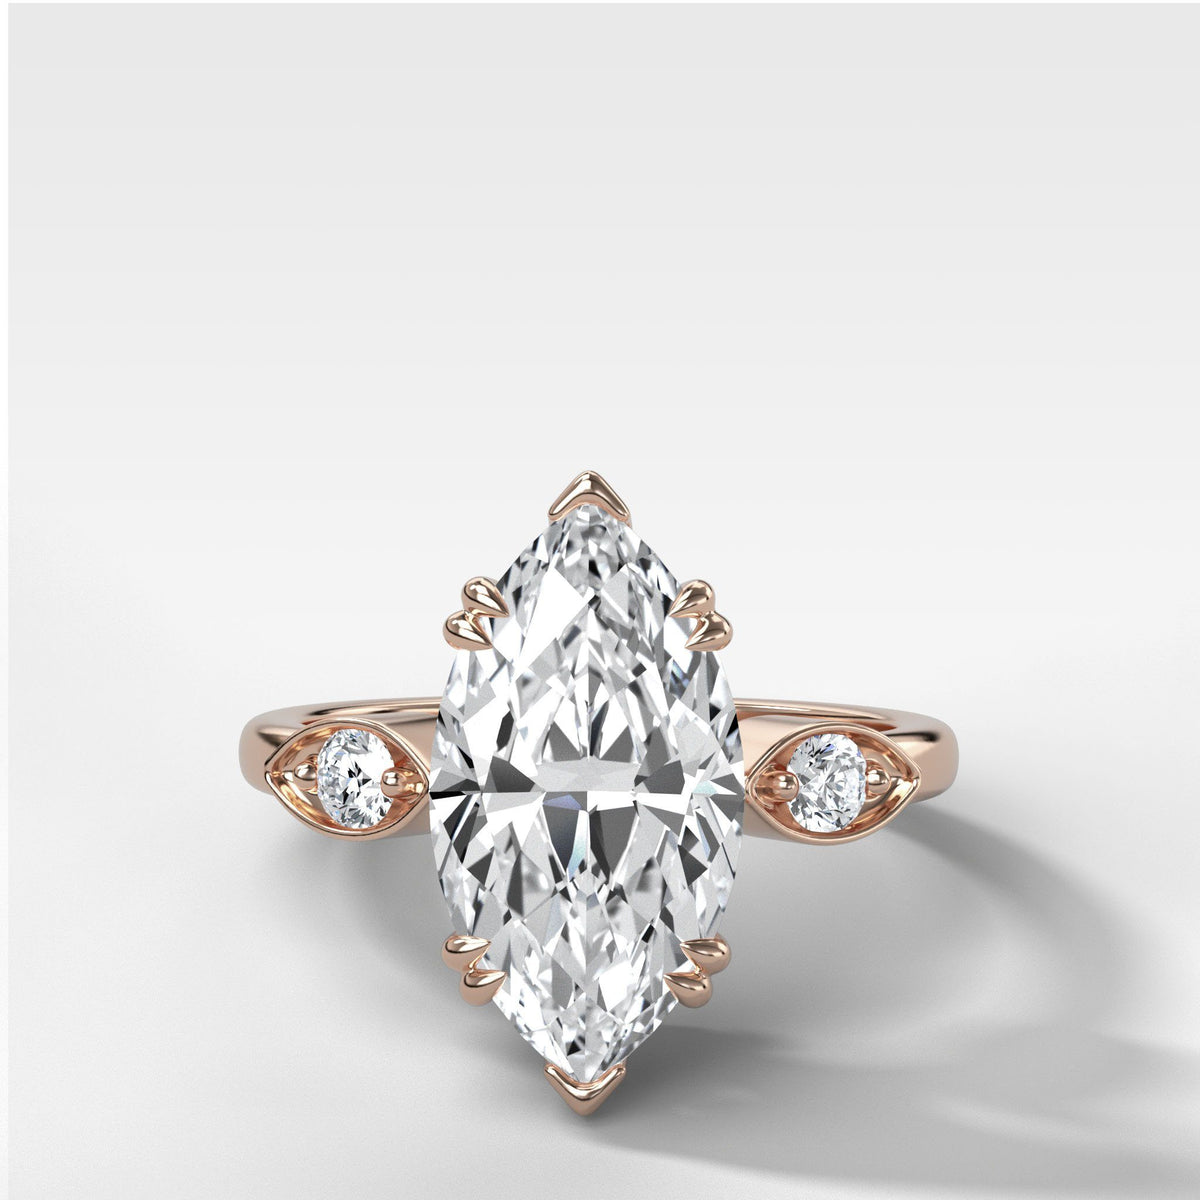 Vintage Ridge Shank Diamond Engagement Ring With Marquise Cut by Good Stone in Rose Gold